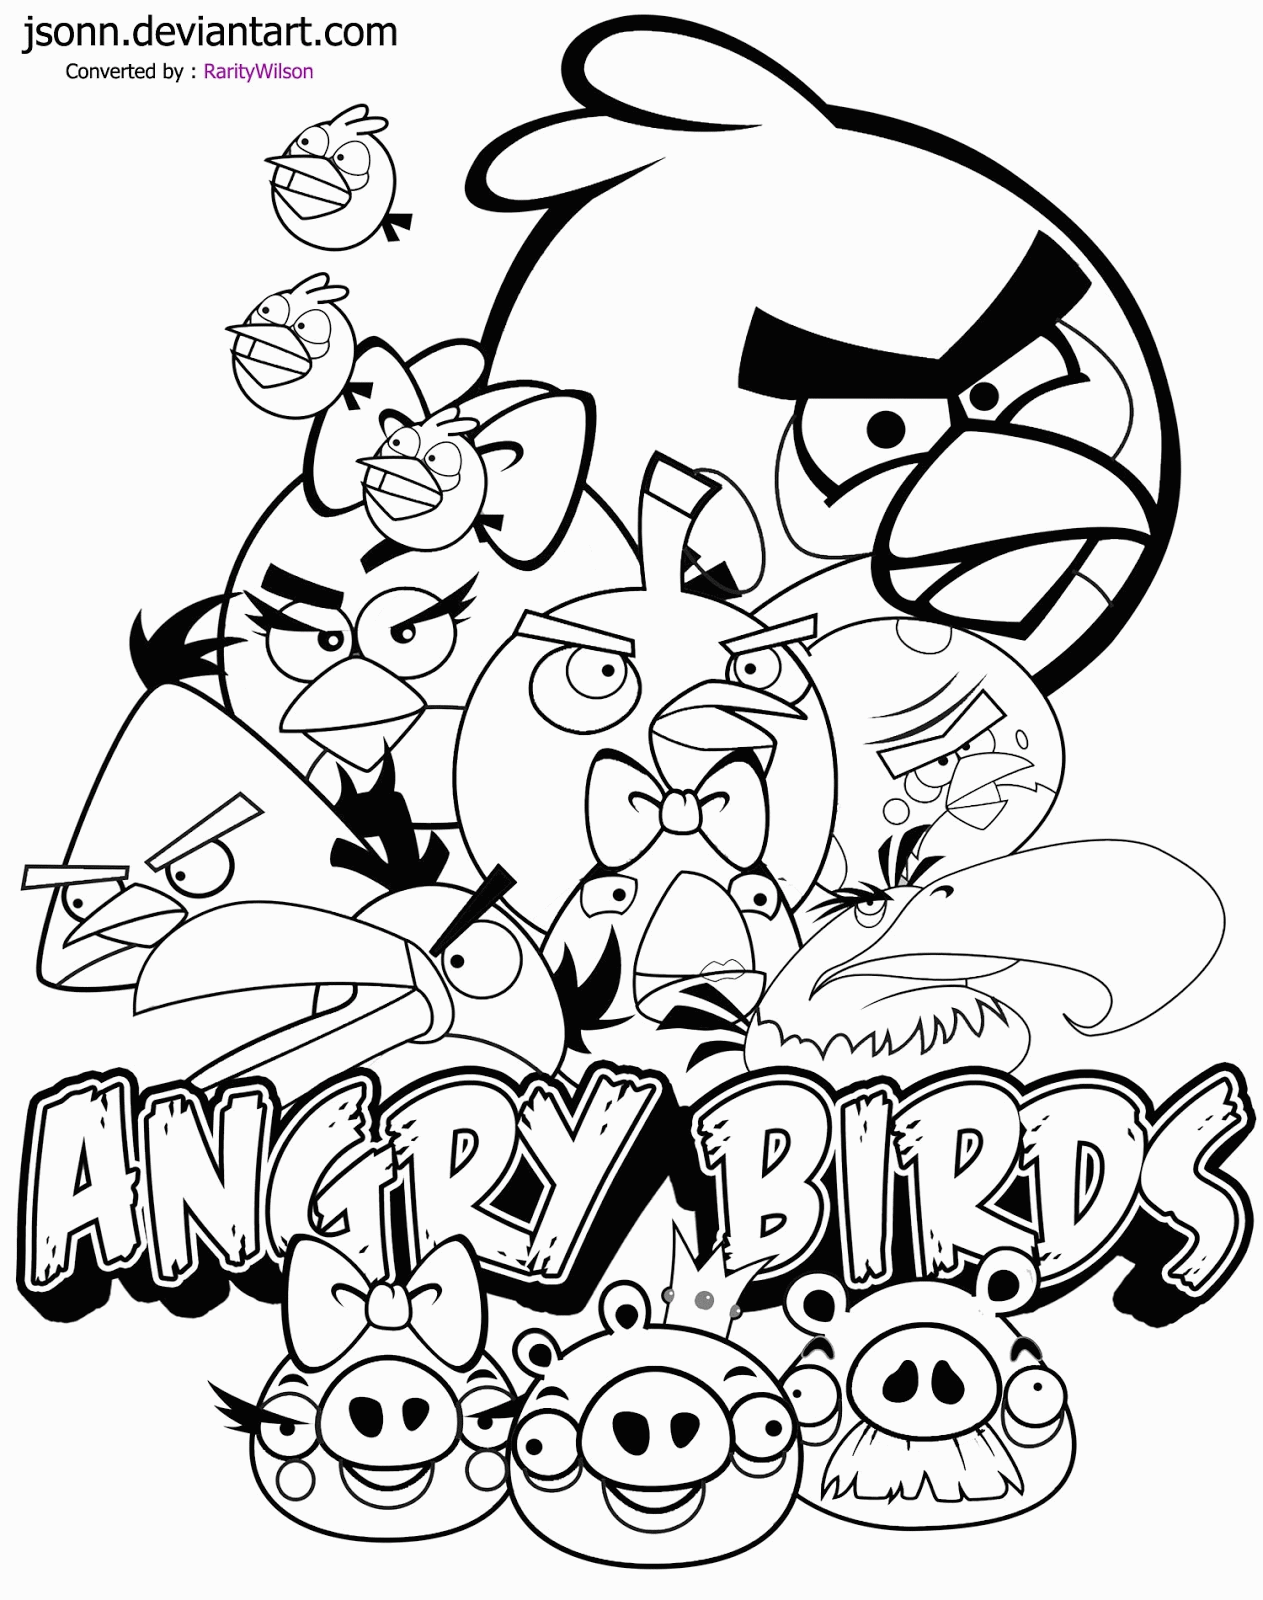 Angry Birds Coloring Pages At Thanksgiving - Coloring Pages For ...